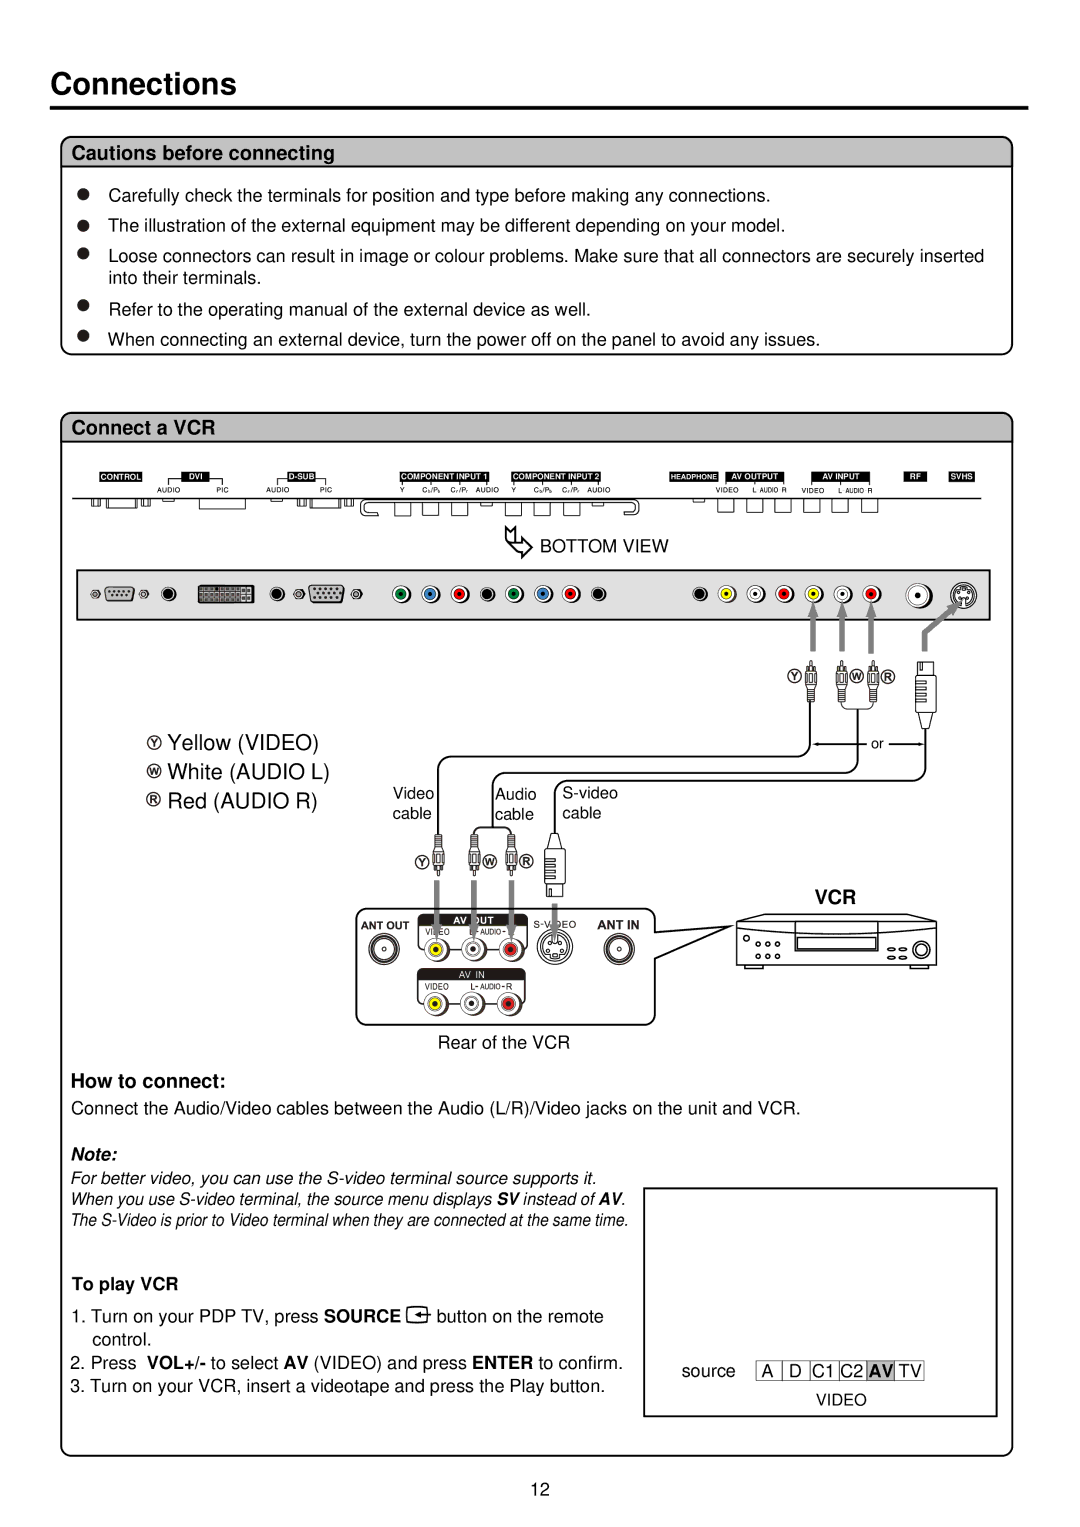 Palsonic PDP4250 owner manual Connections, Connect a VCR, How to connect, To play VCR 